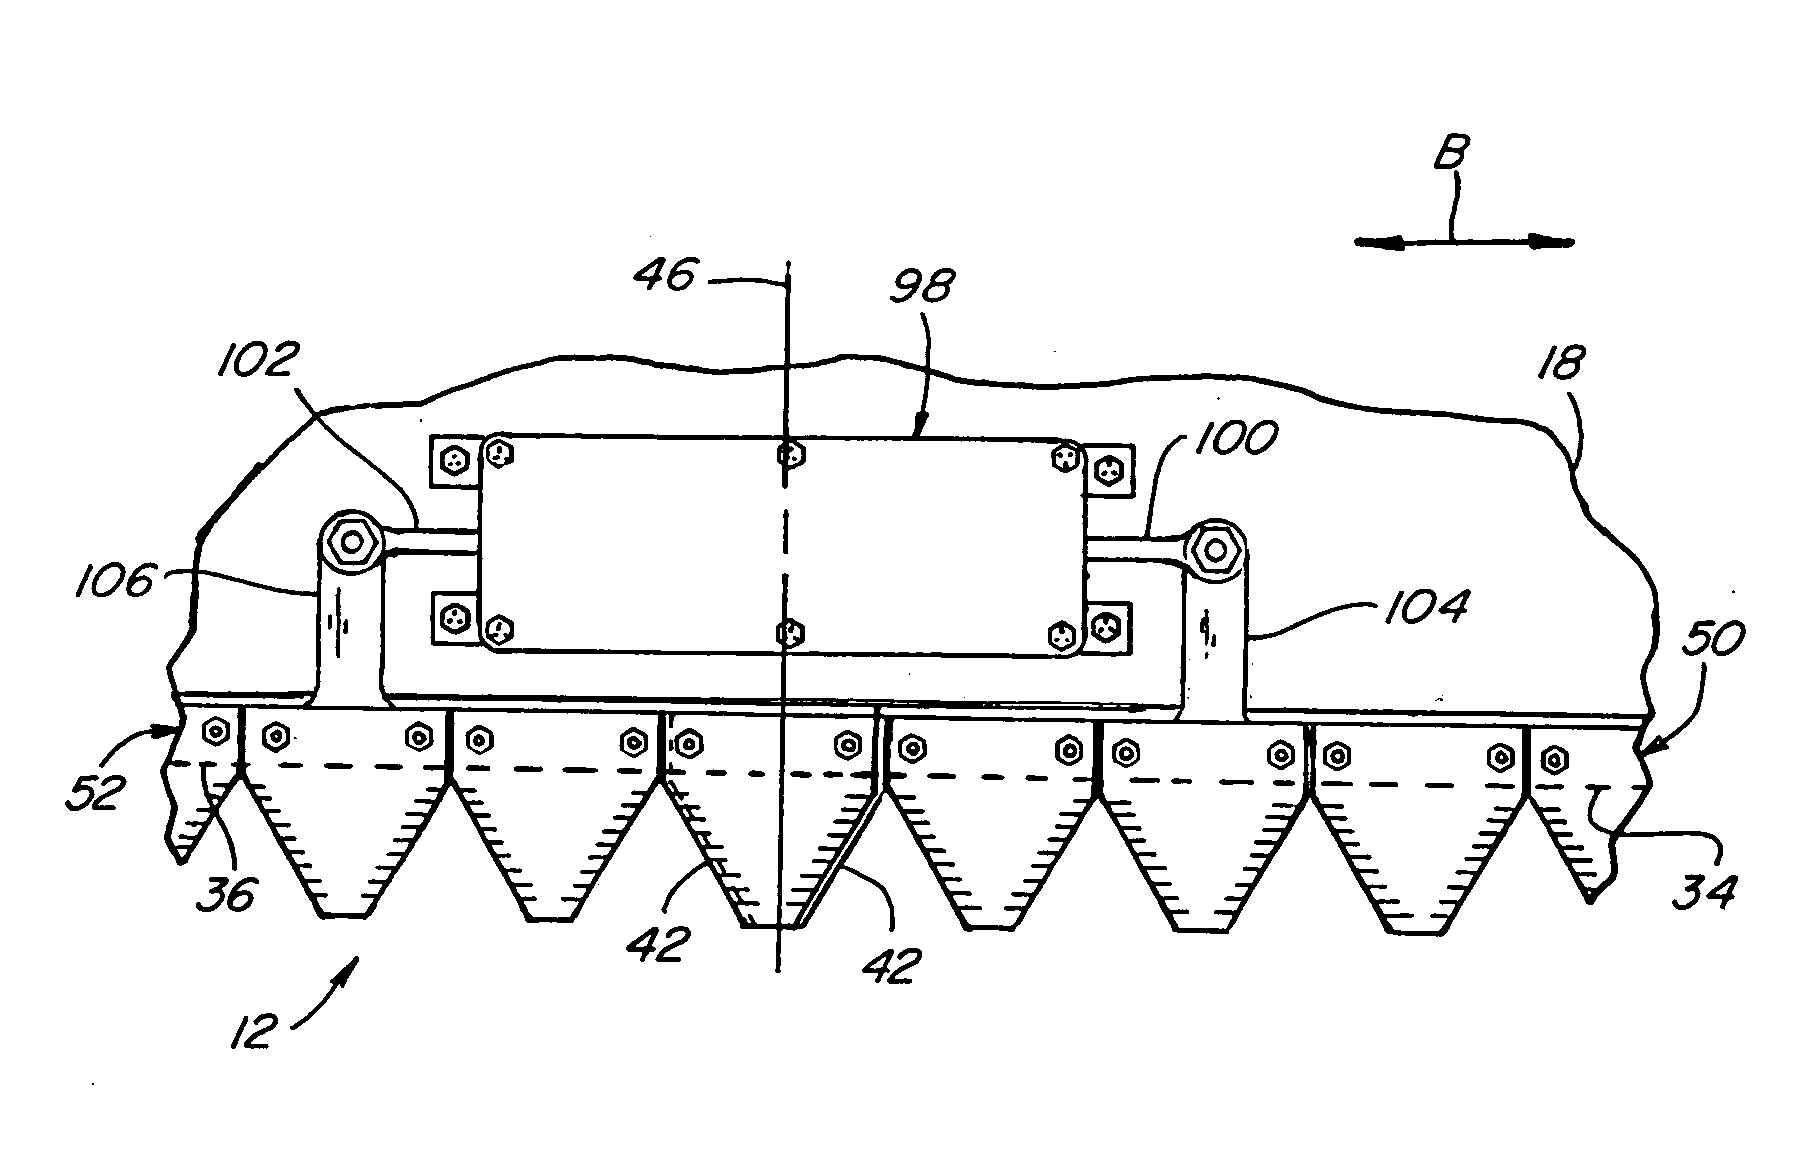 Reversing transfer drive for sickle cutting knives on a header of an agricultural combine